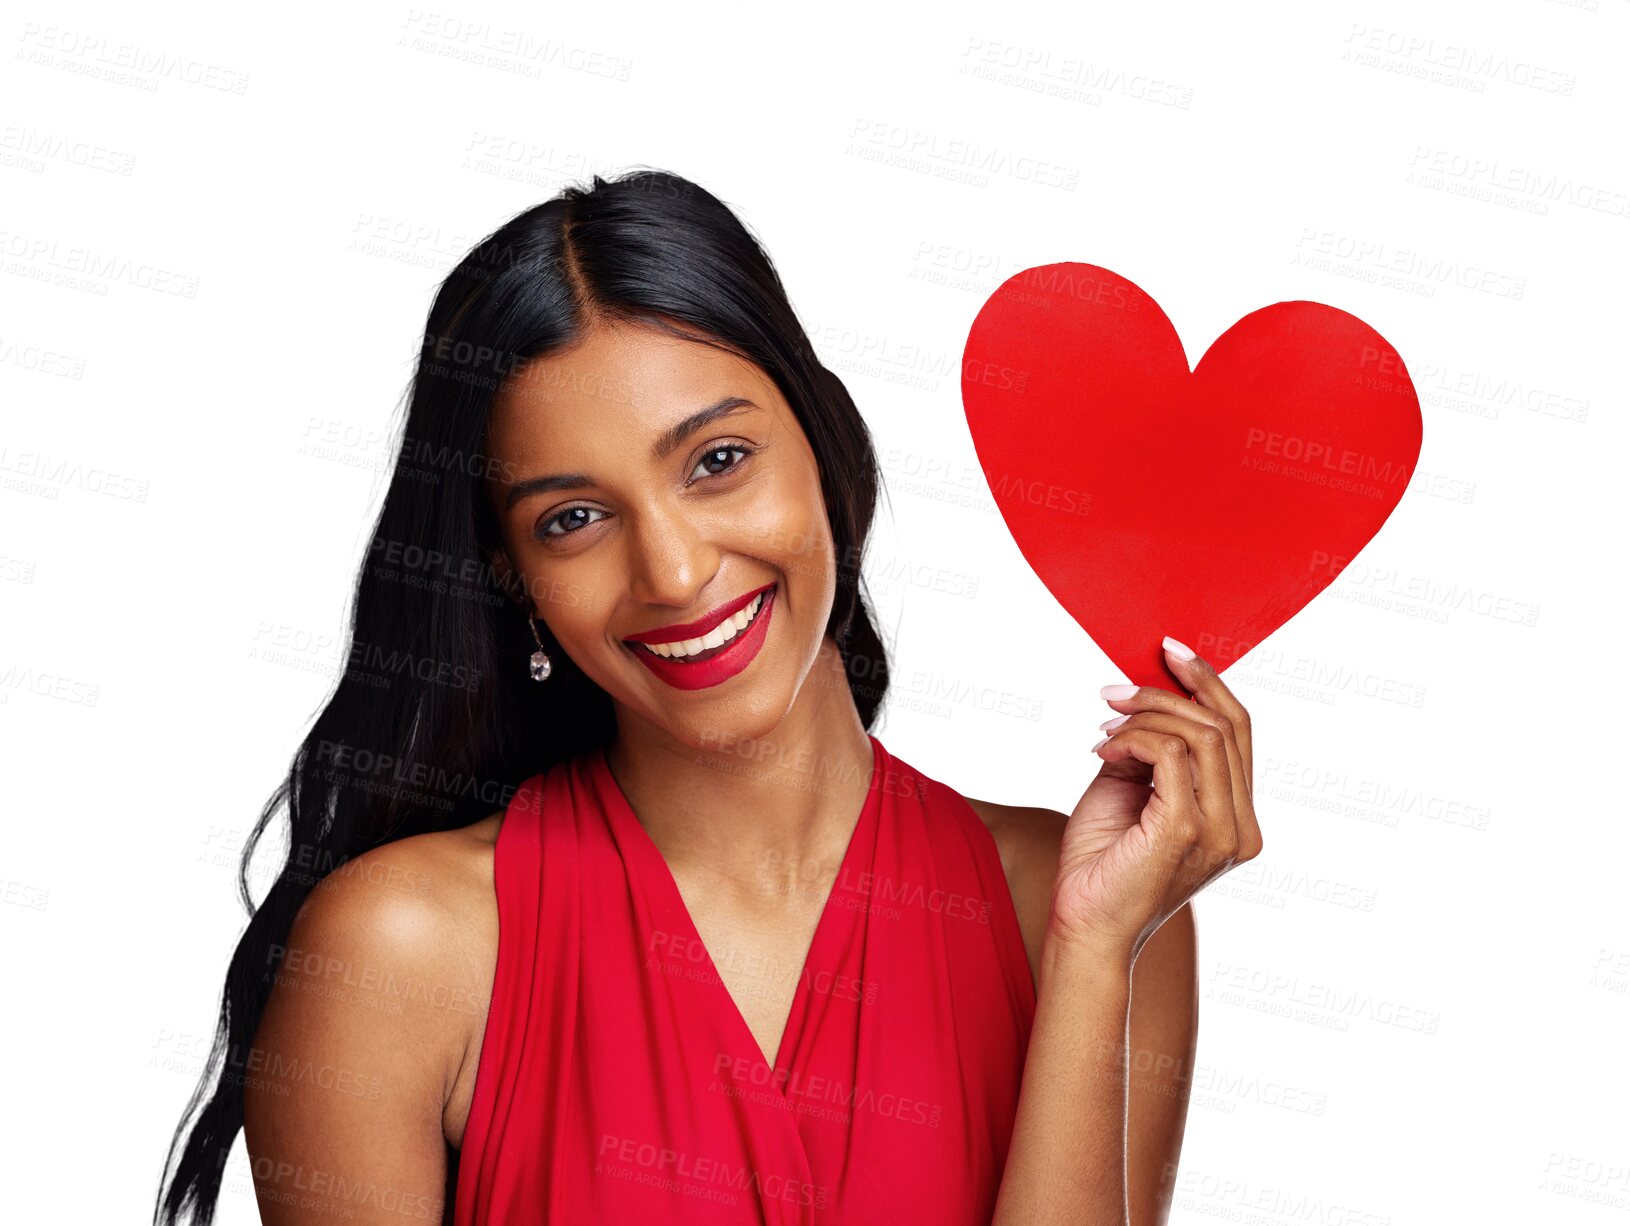 Buy stock photo Portrait, heart and woman with romance on valentines day isolated on png transparent background for love. Red lips, emoji and happy female holding a shape or symbol of affection, care and kindness